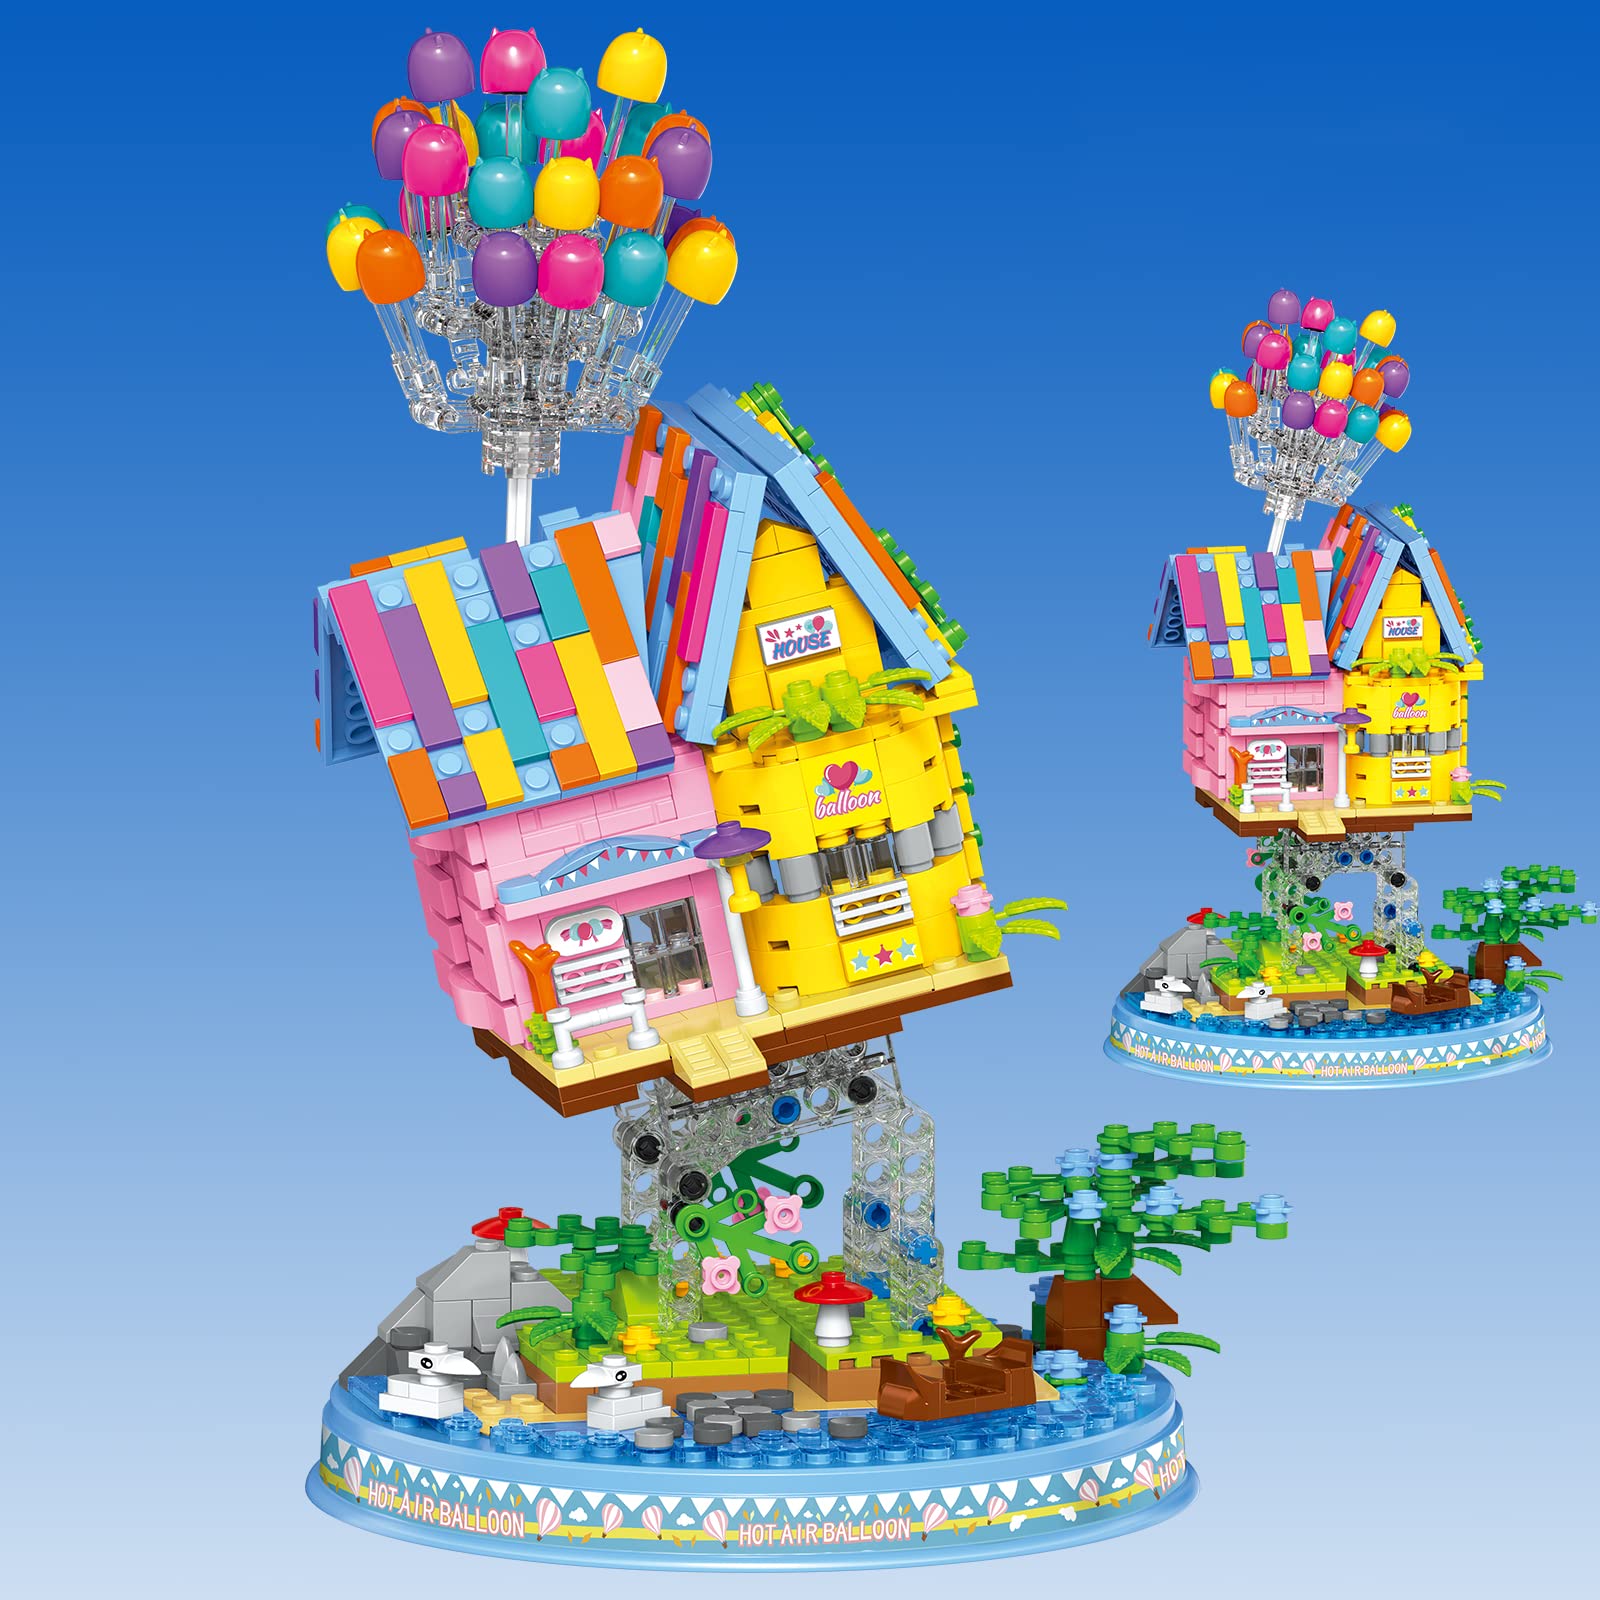 R HOME STORE Up Balloon House Building Kit for Kids Age 8-14 Yrs,Creative Building Block Set 931pcs,Girl Toys for Christmas and Birthday Gifts,DIY Educational Toys for Kids